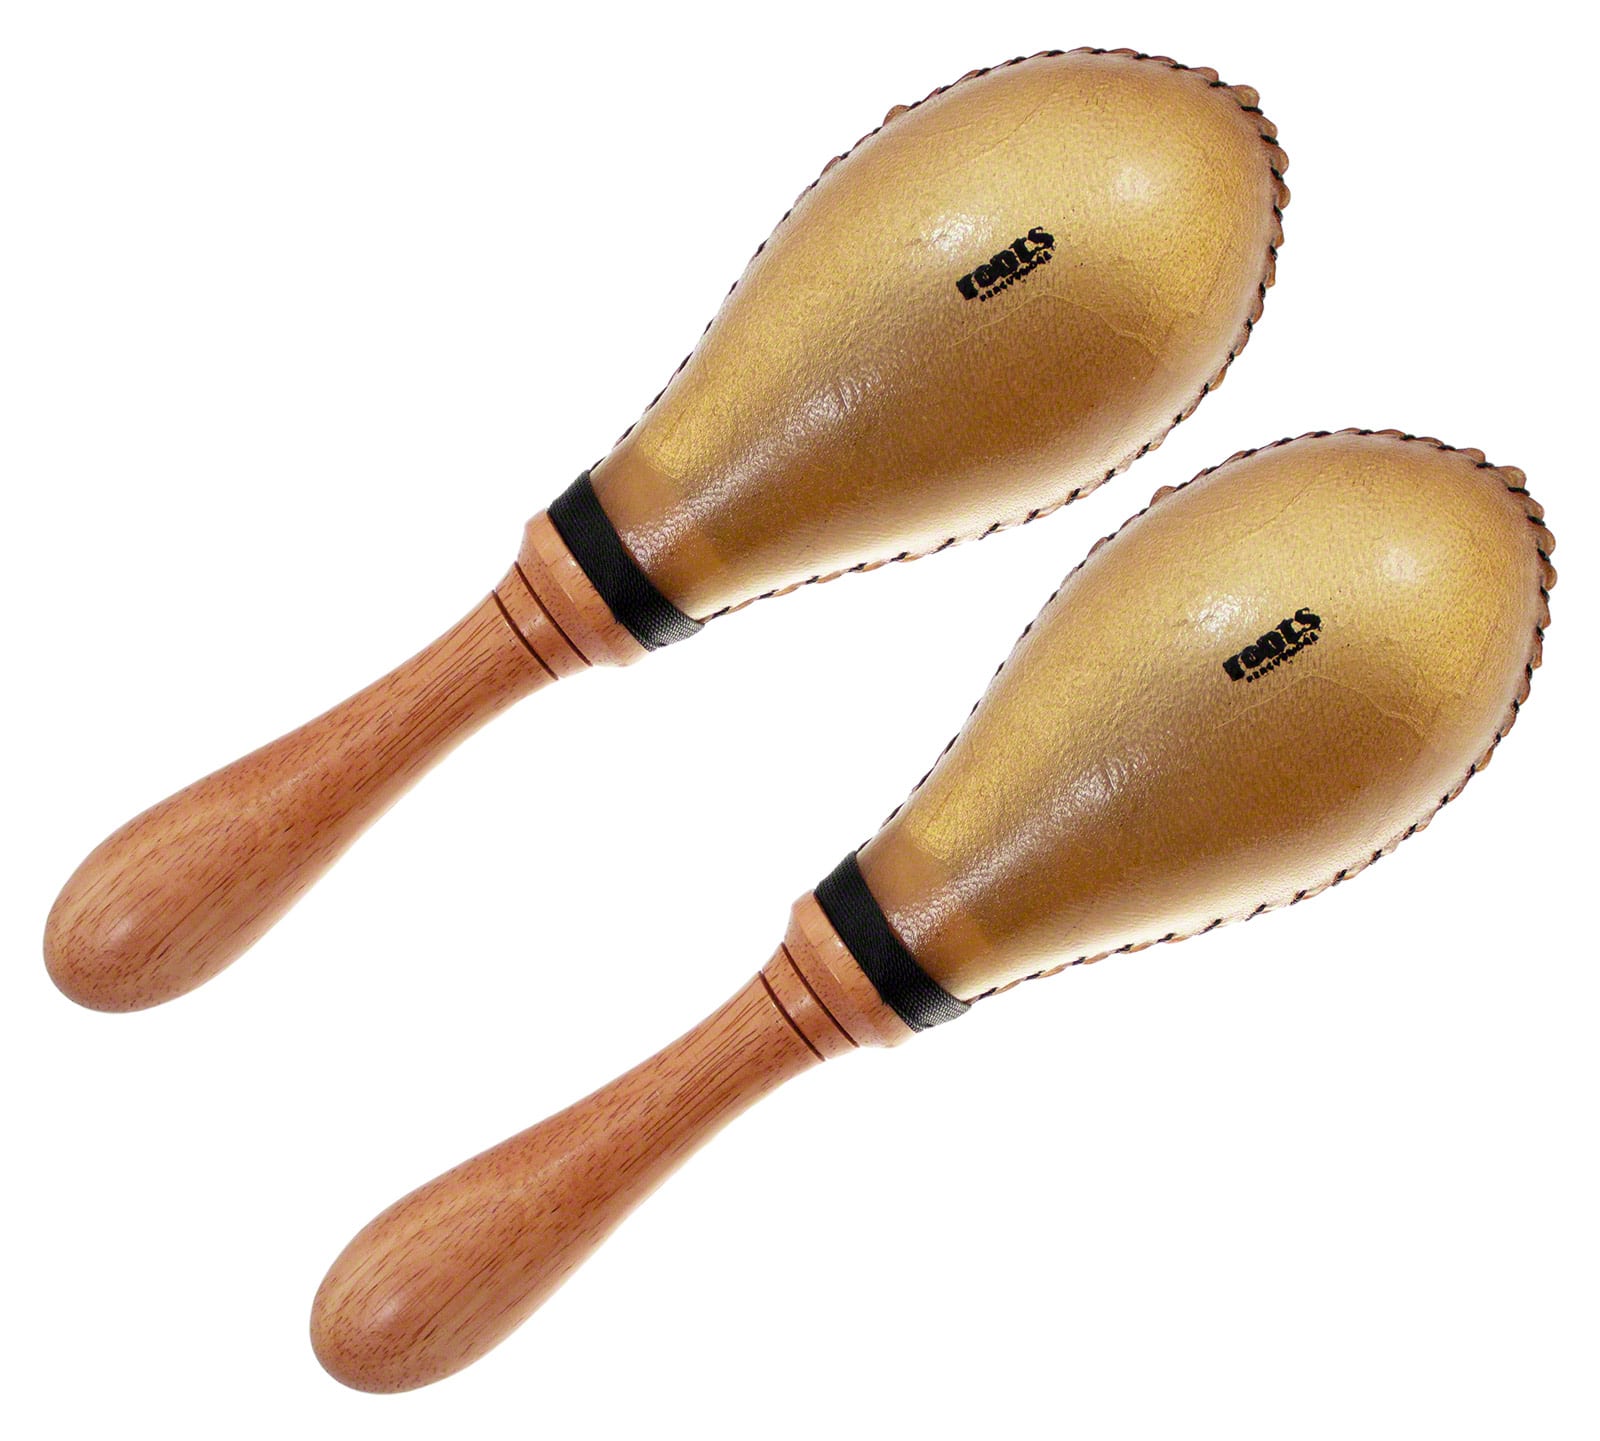 ROOTS PERCUSSION TRADITIONAL RAWHIDE MARACAS - LARGE 28CM - PAIR